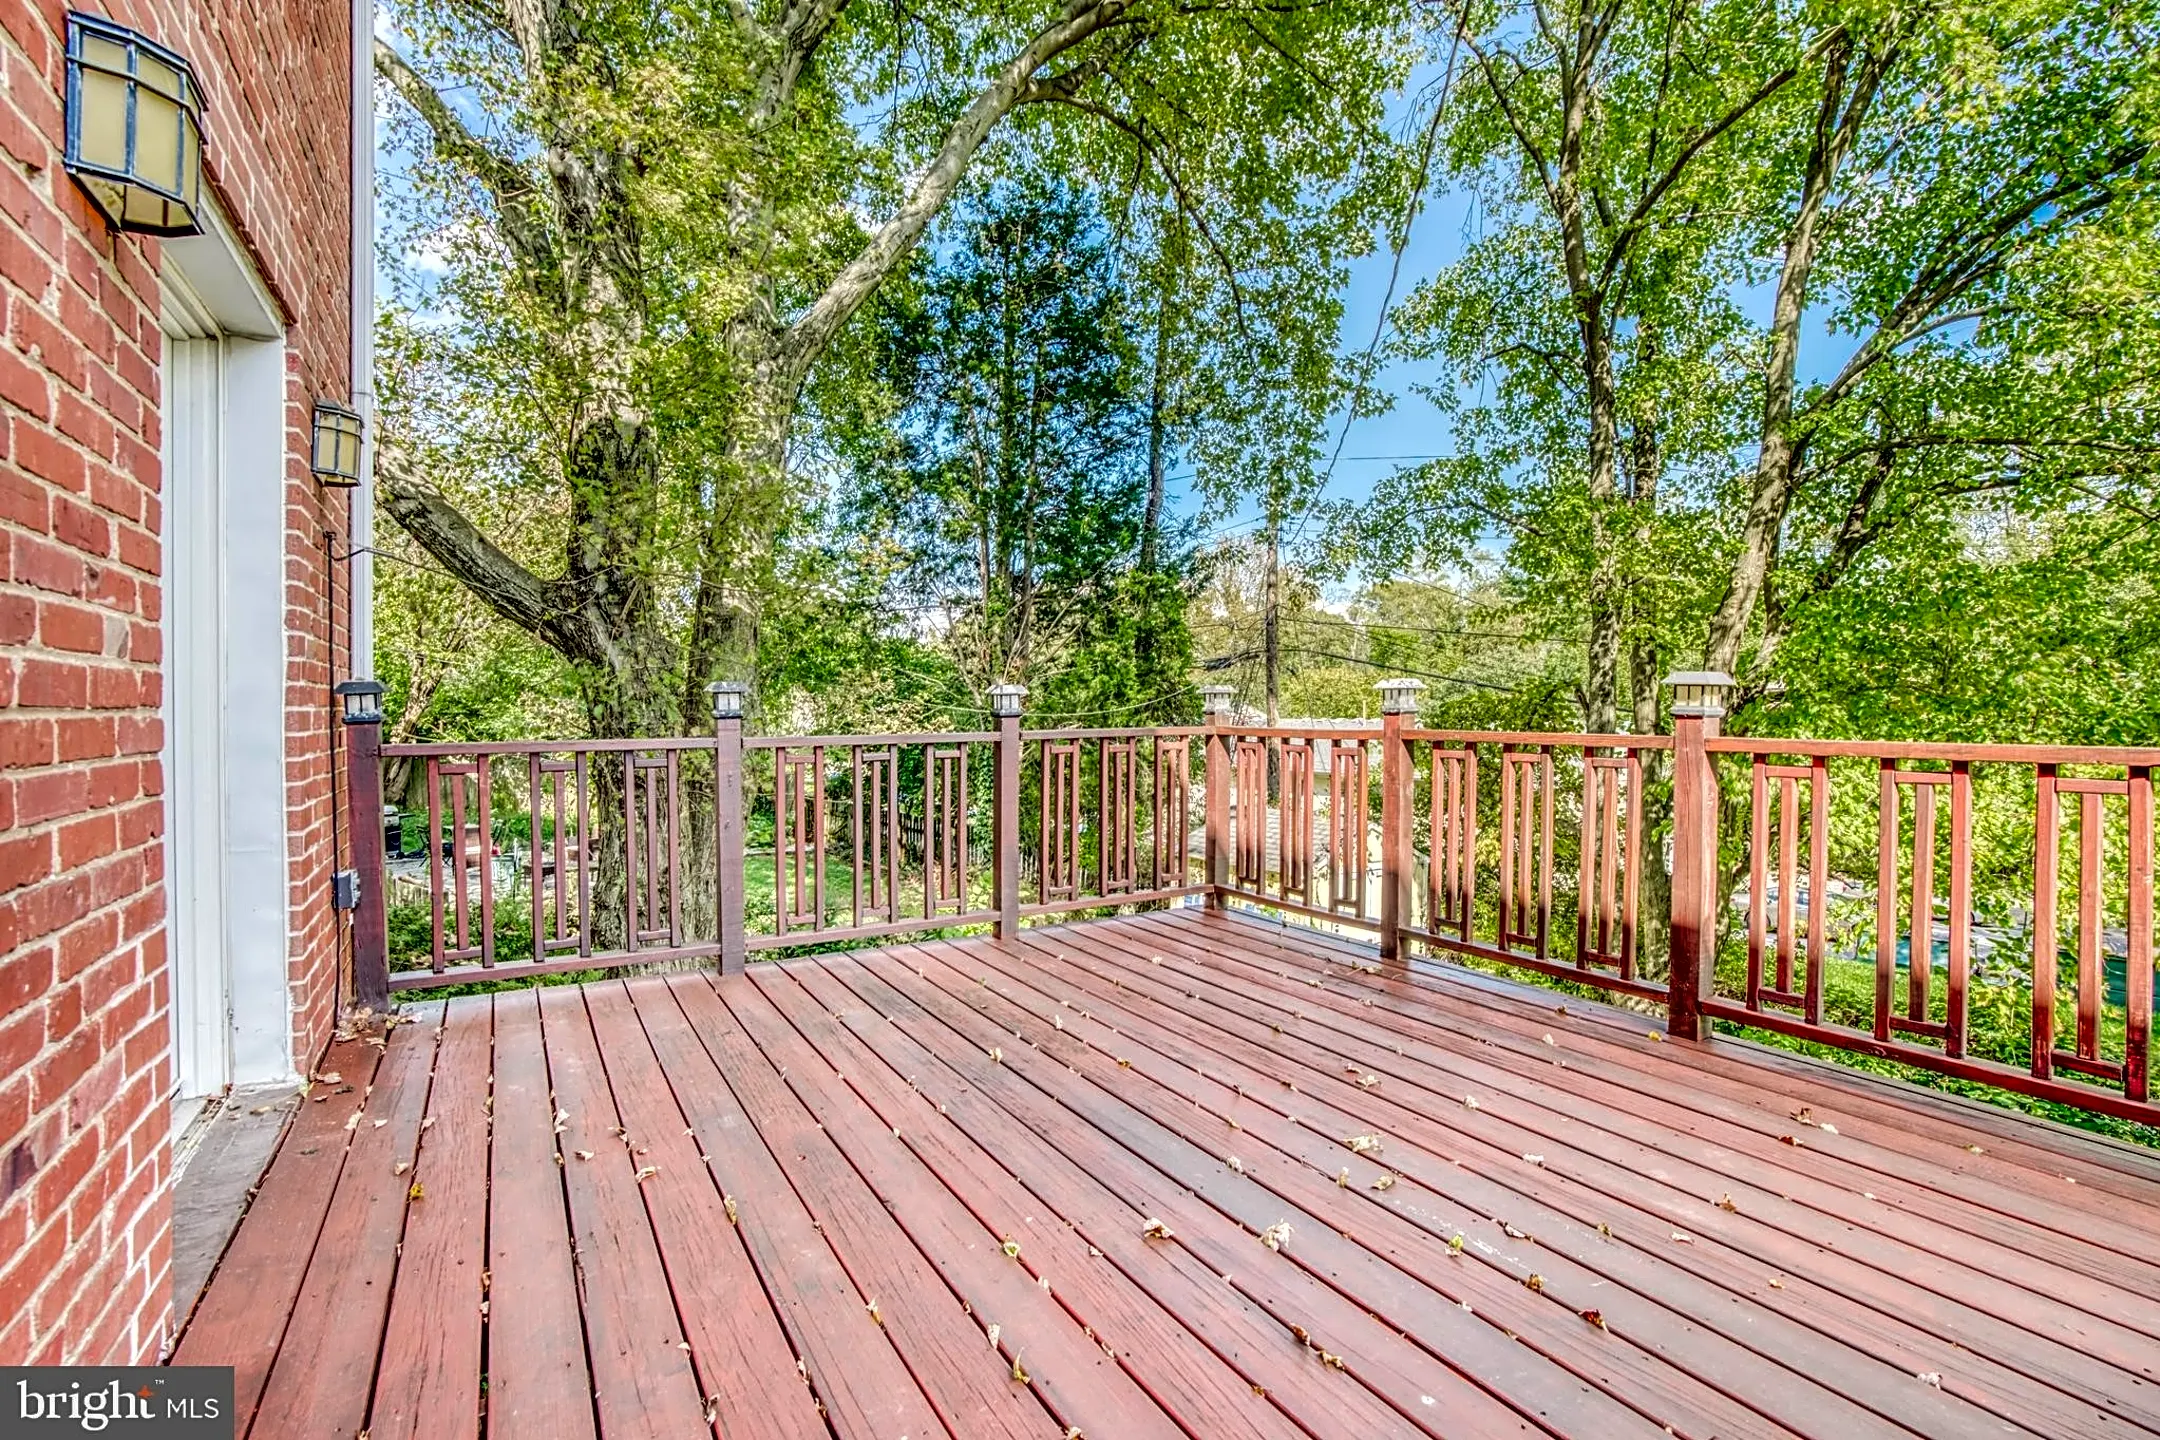 Patio / Deck - 6107 Maylane Dr - Baltimore, MD